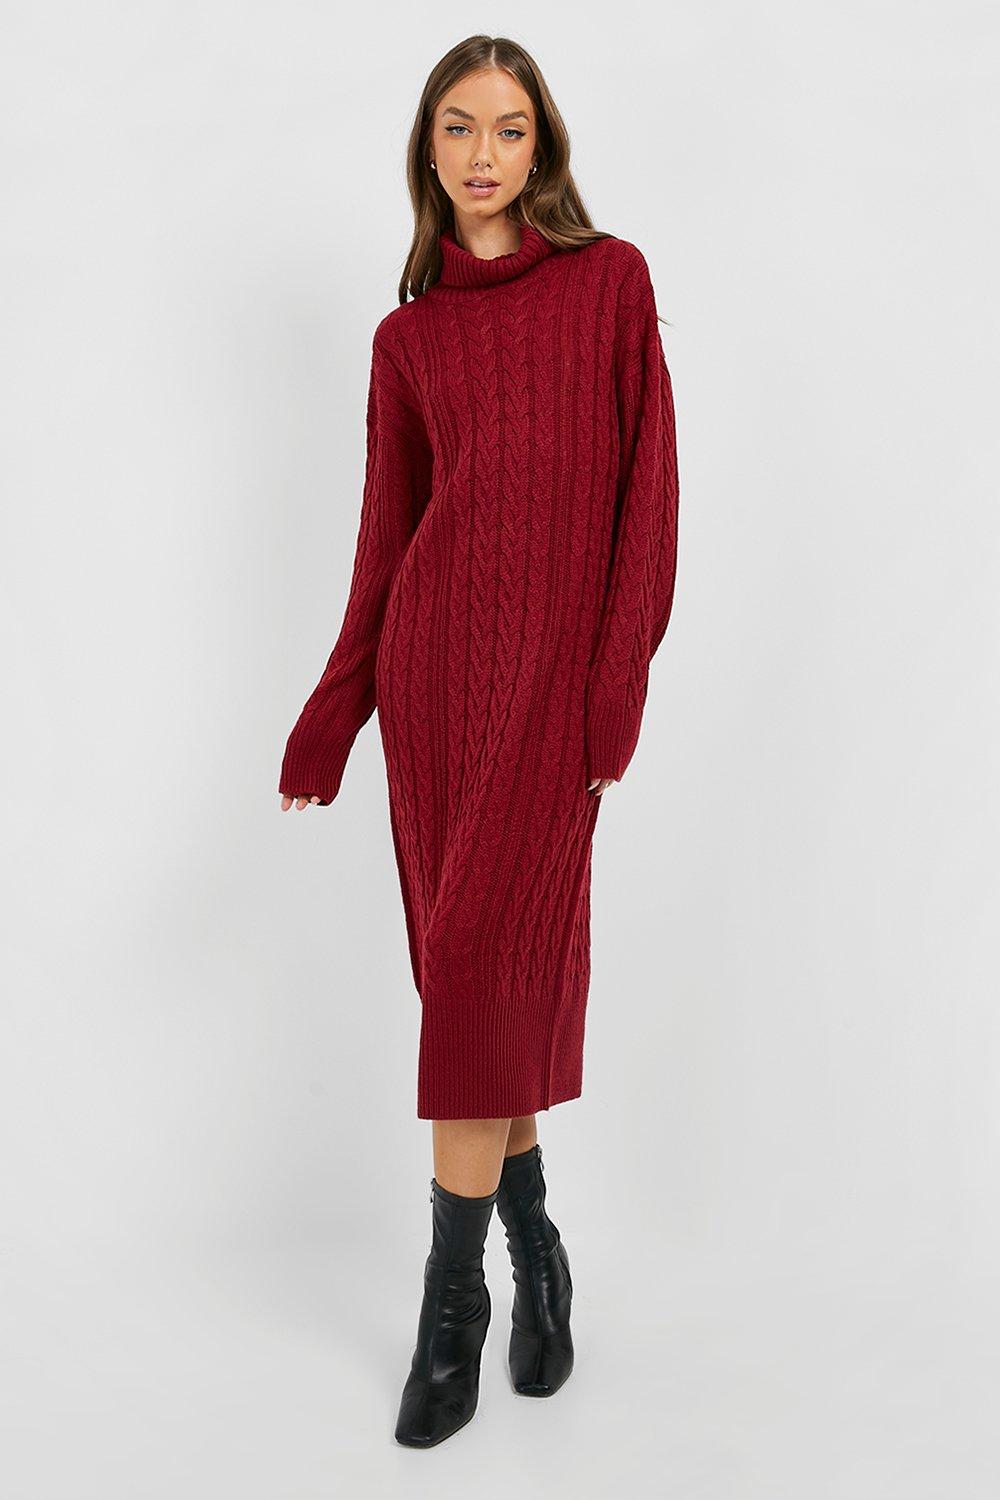 Womens Cable Knit Roll Neck Midi Dress - Red - S, Red